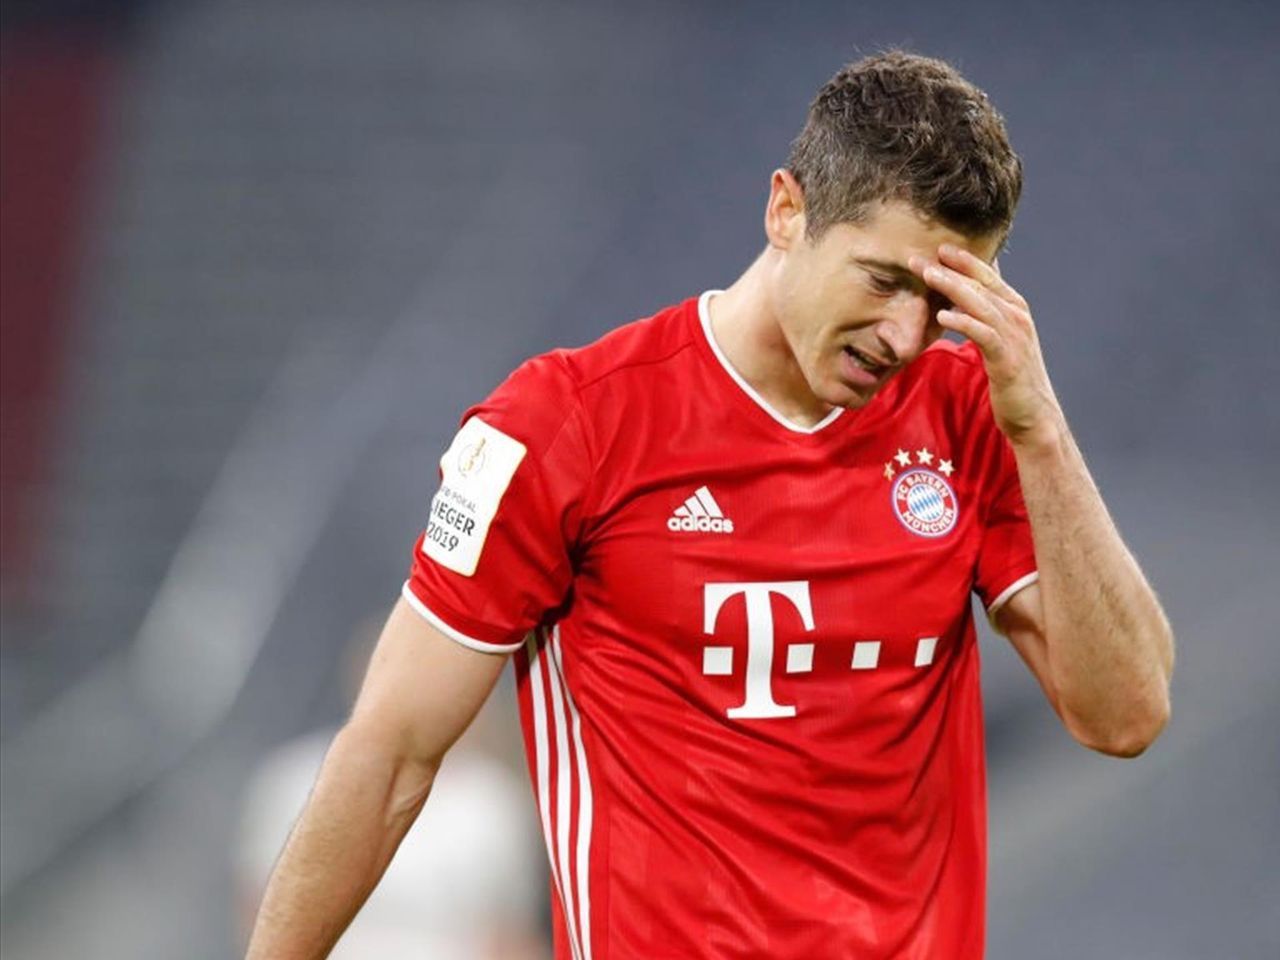 Robert Lewandowski not the only player 'robbed' by hasty Ballon d'Or cancellation